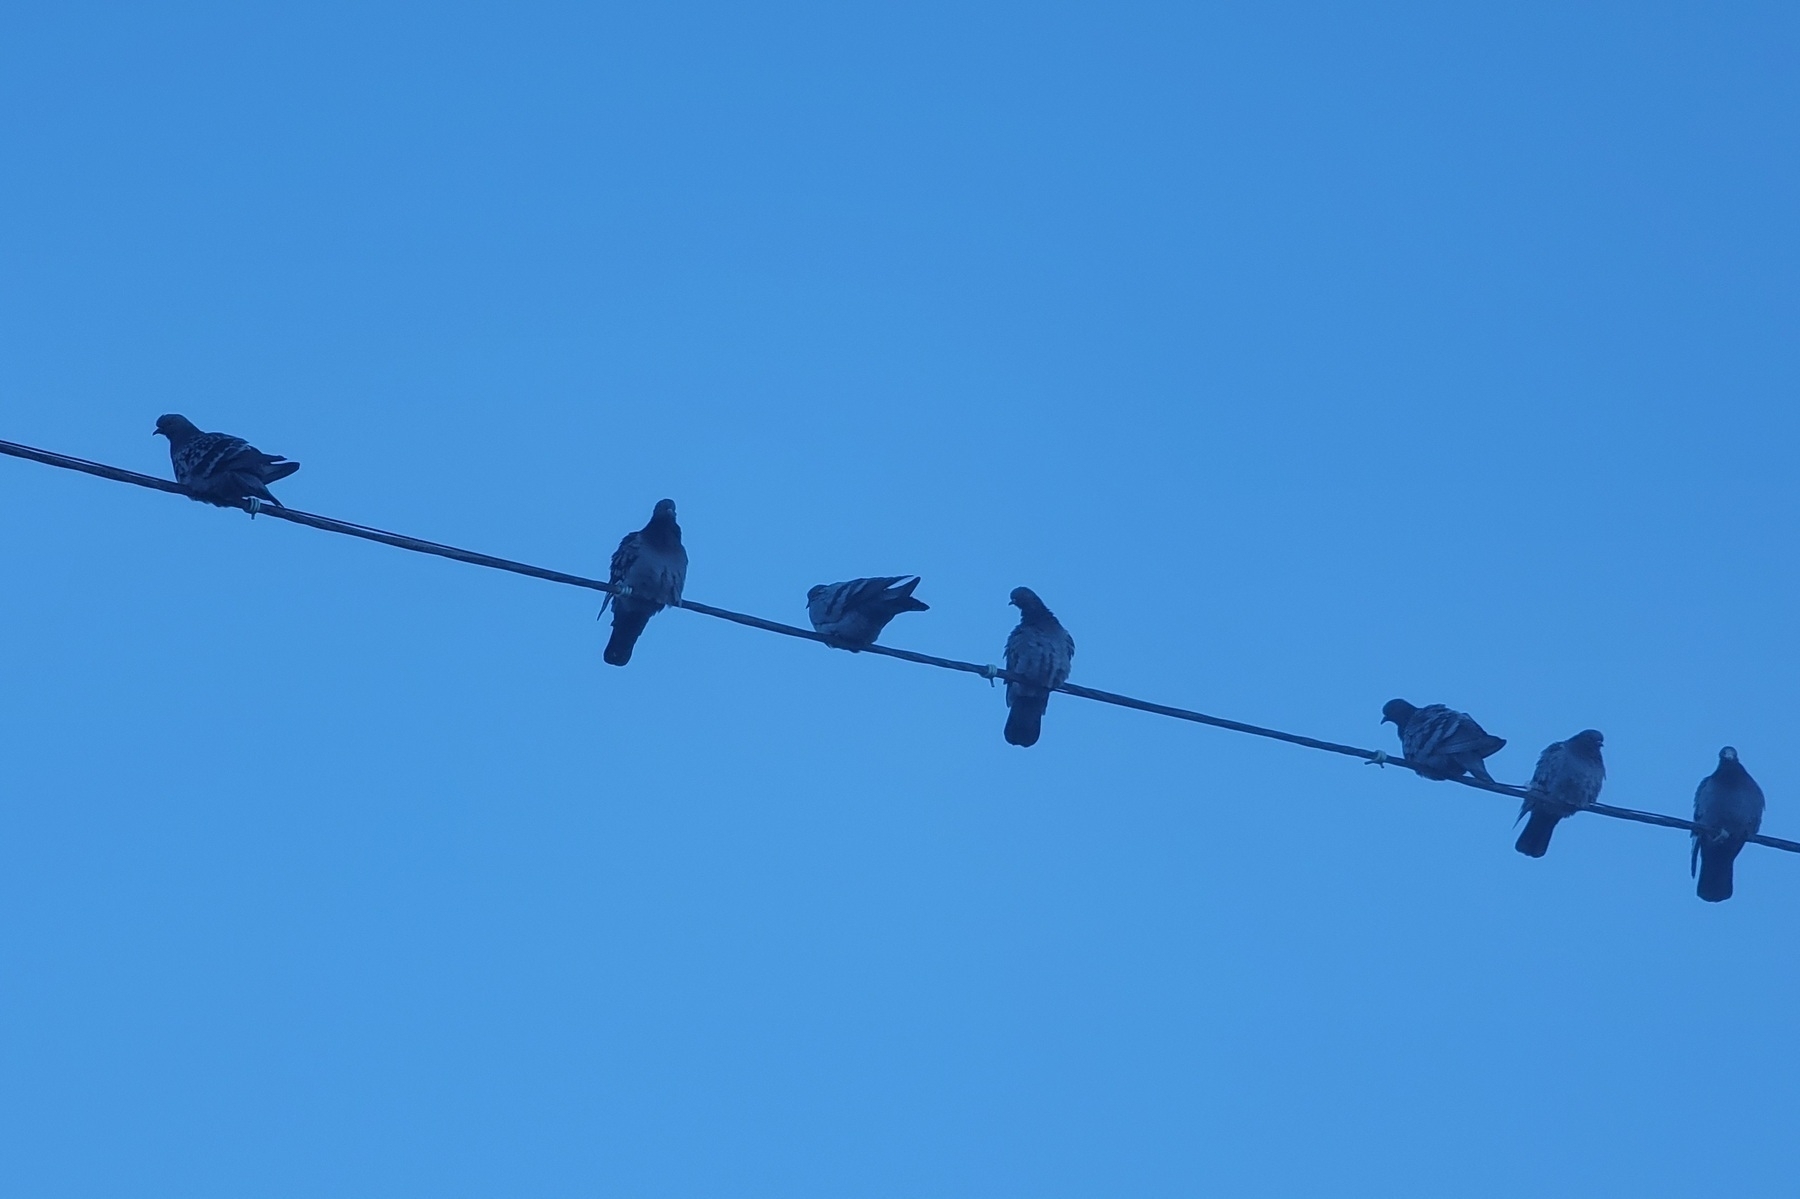 7 pigeons sitting on a powerline against a blue sky